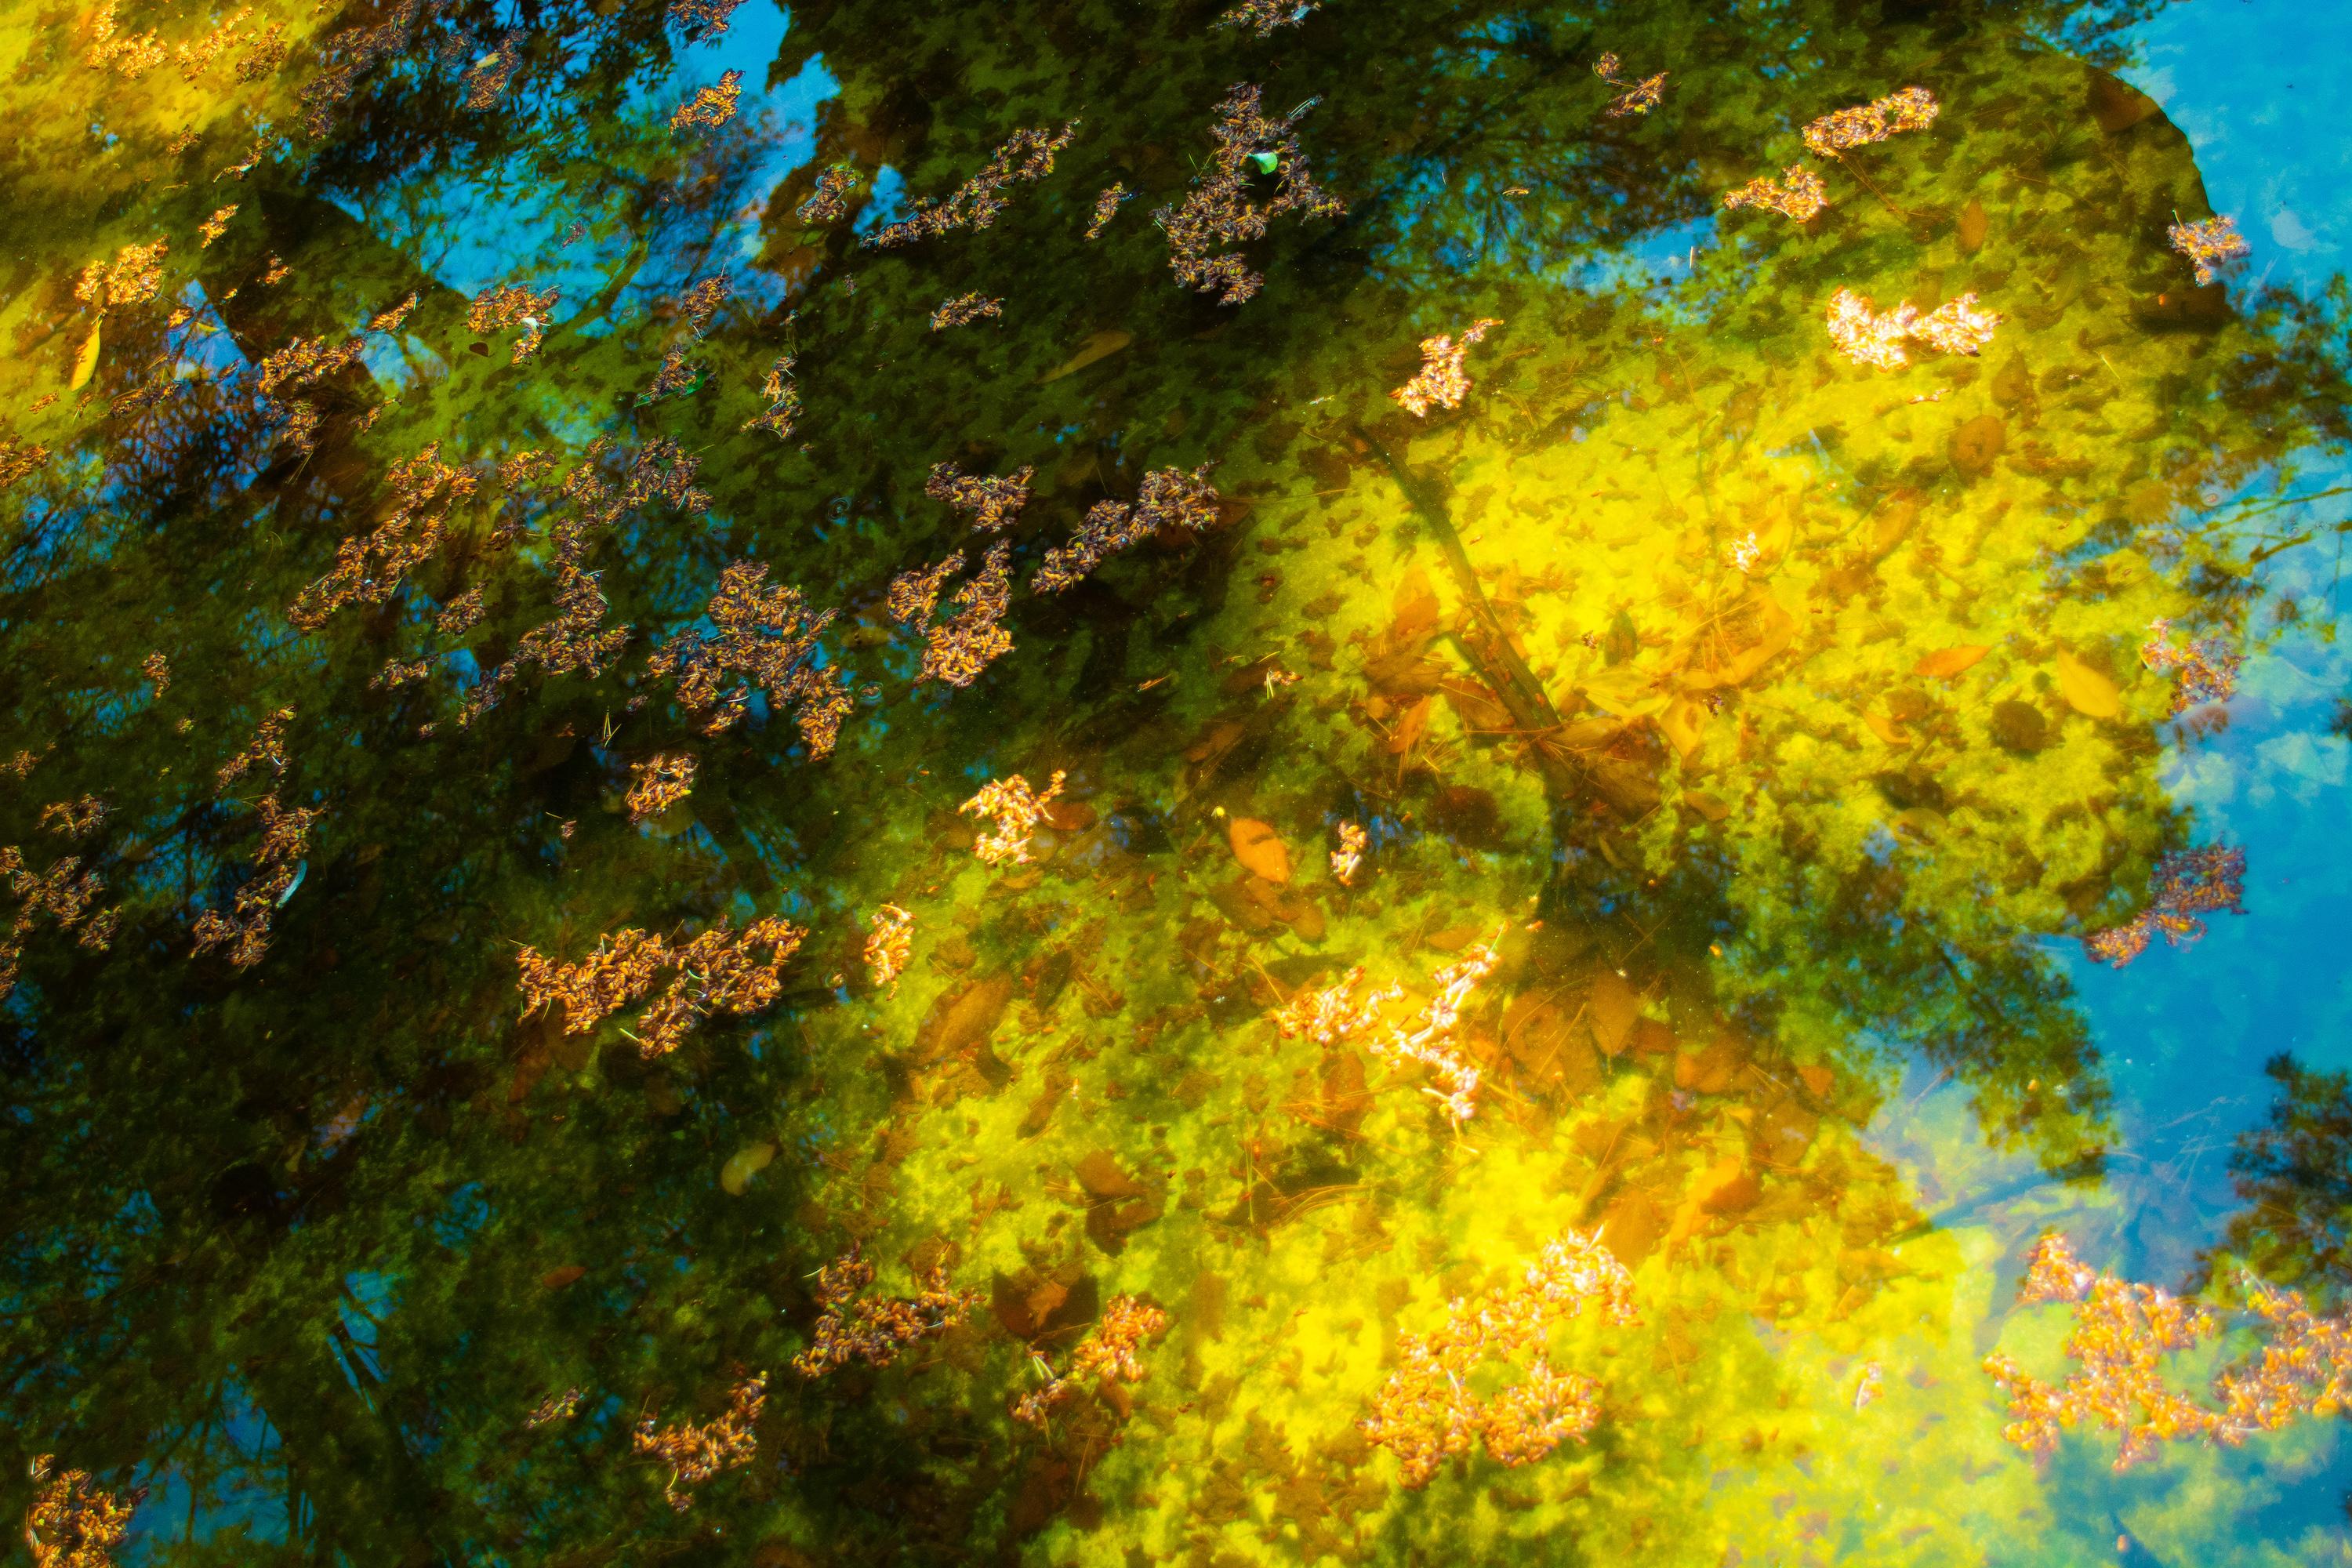 Reflection No. 4- Abstract Landscape Photograph of Pond / Trees in Yellow+ Green